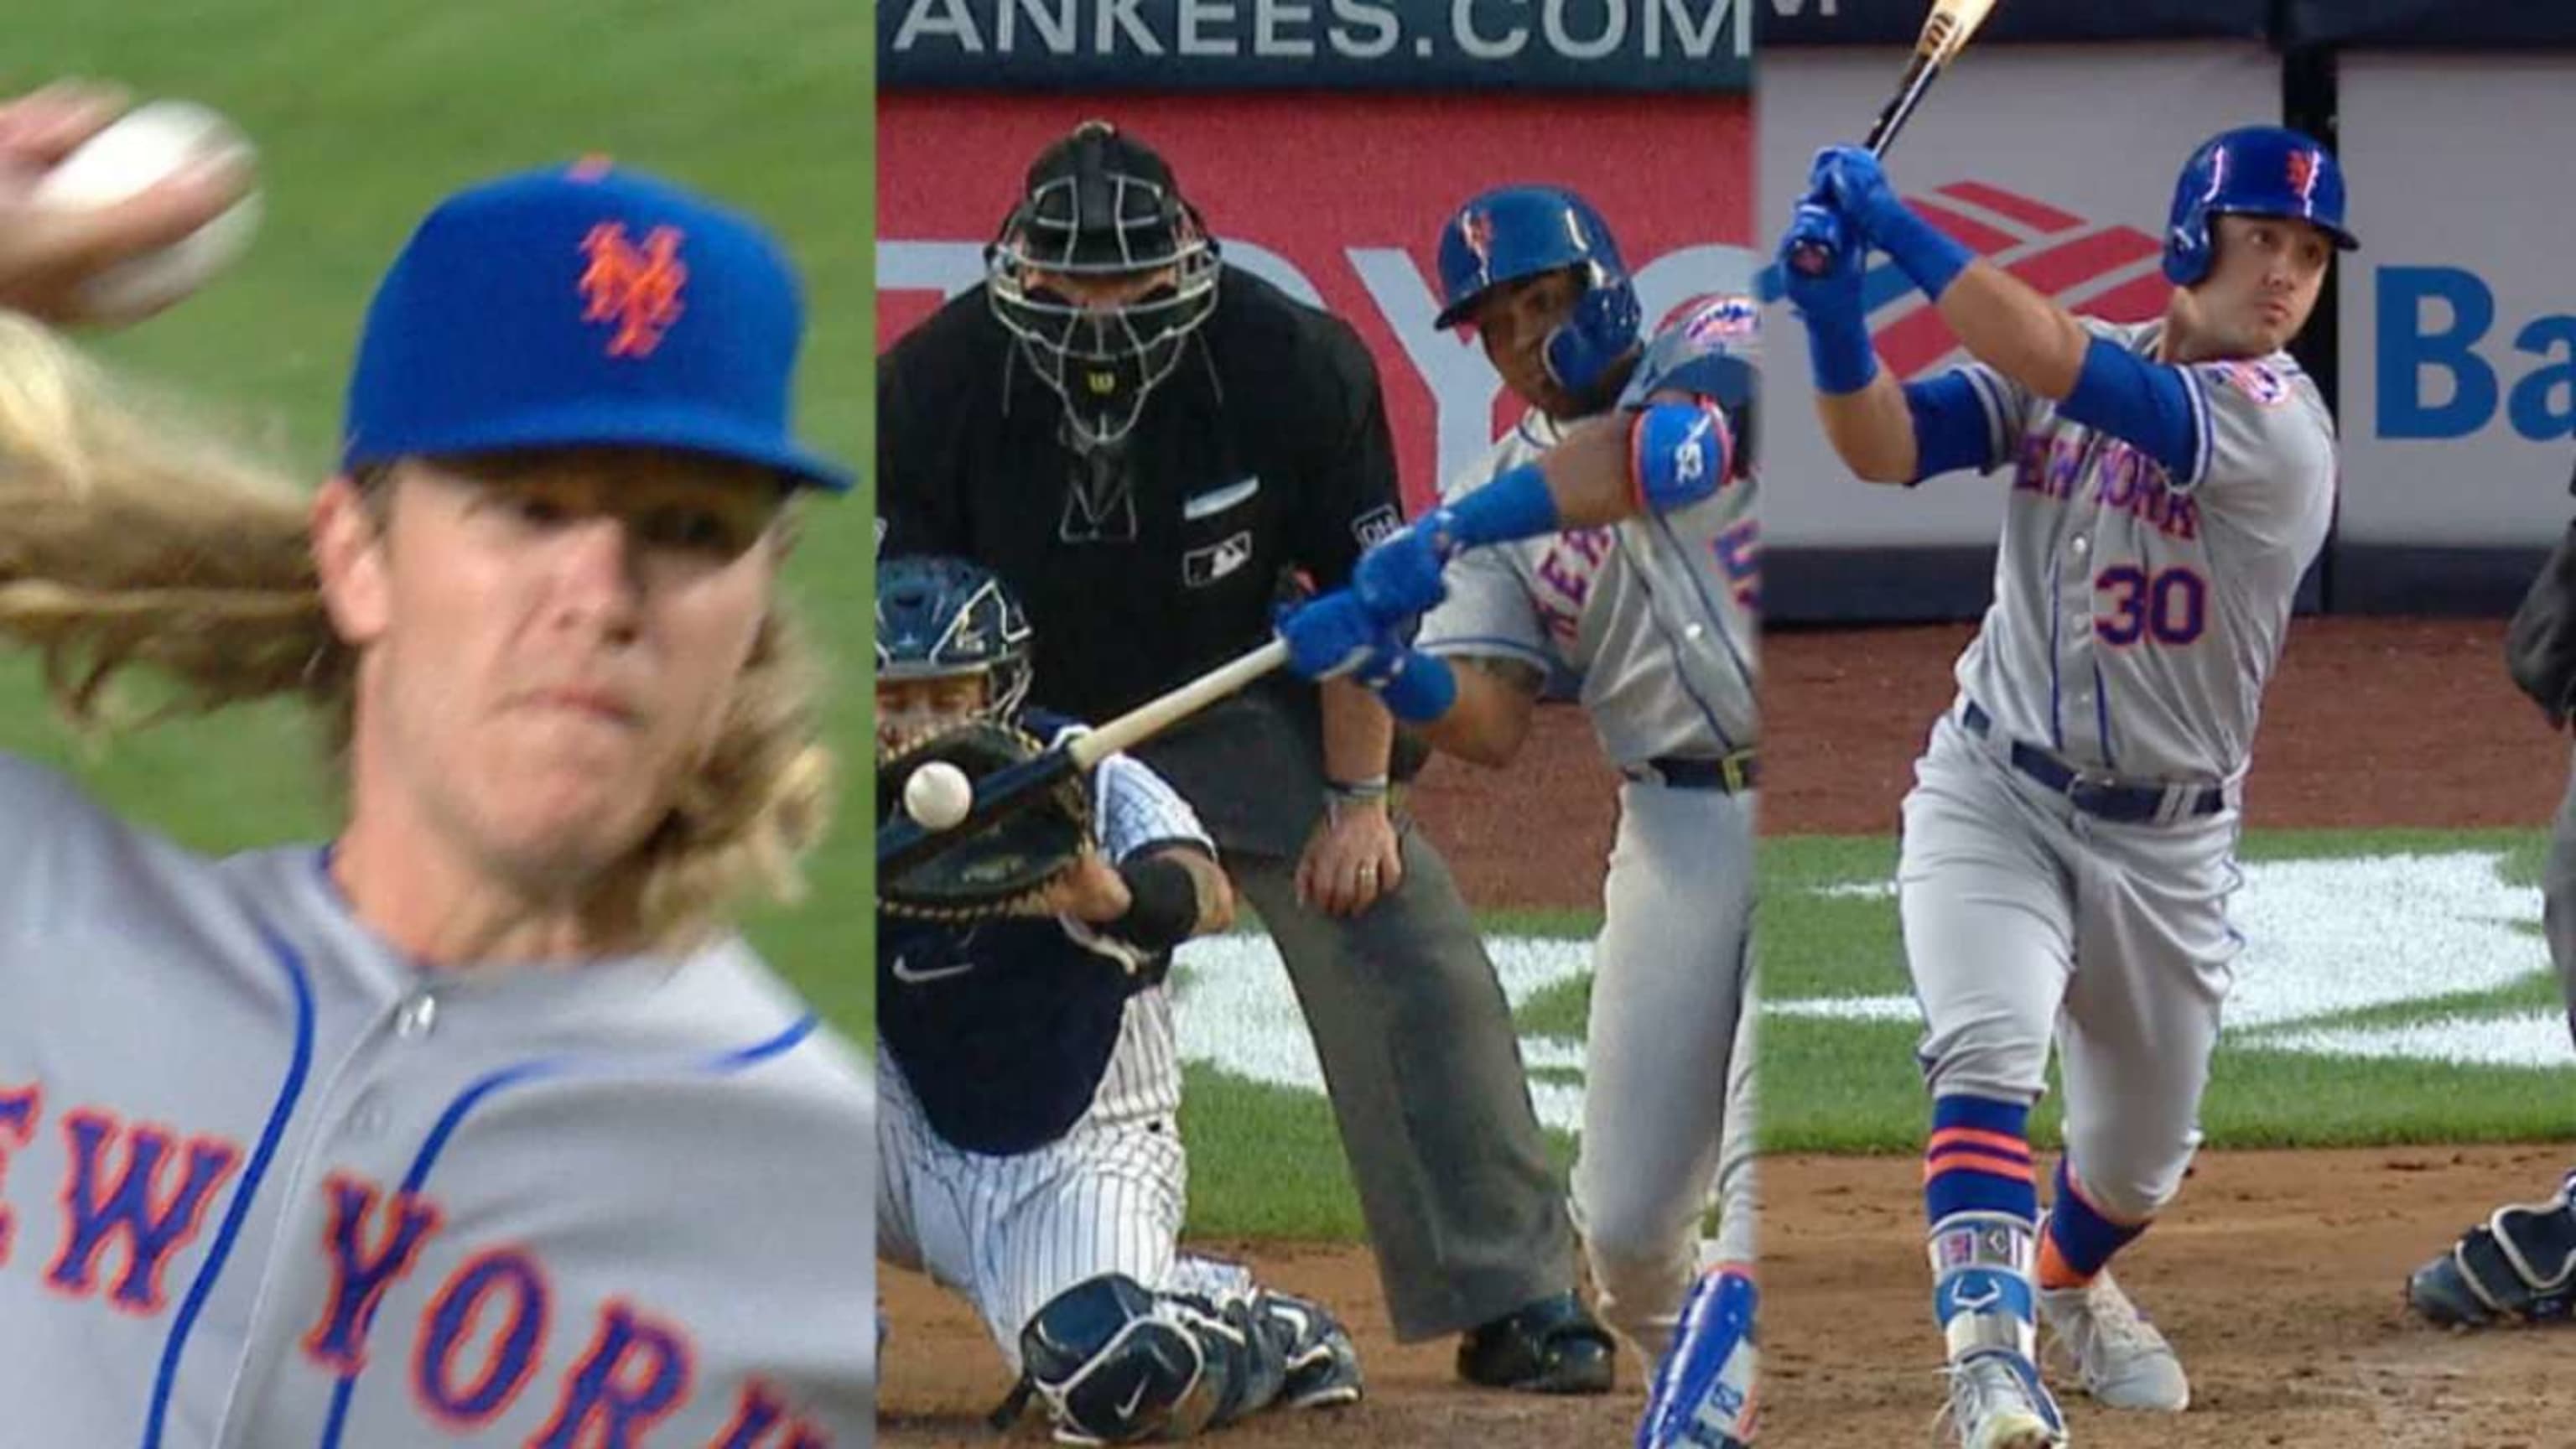 Mets Lose Noah Syndergaard, Yoenis Cespedes and Still Another Game